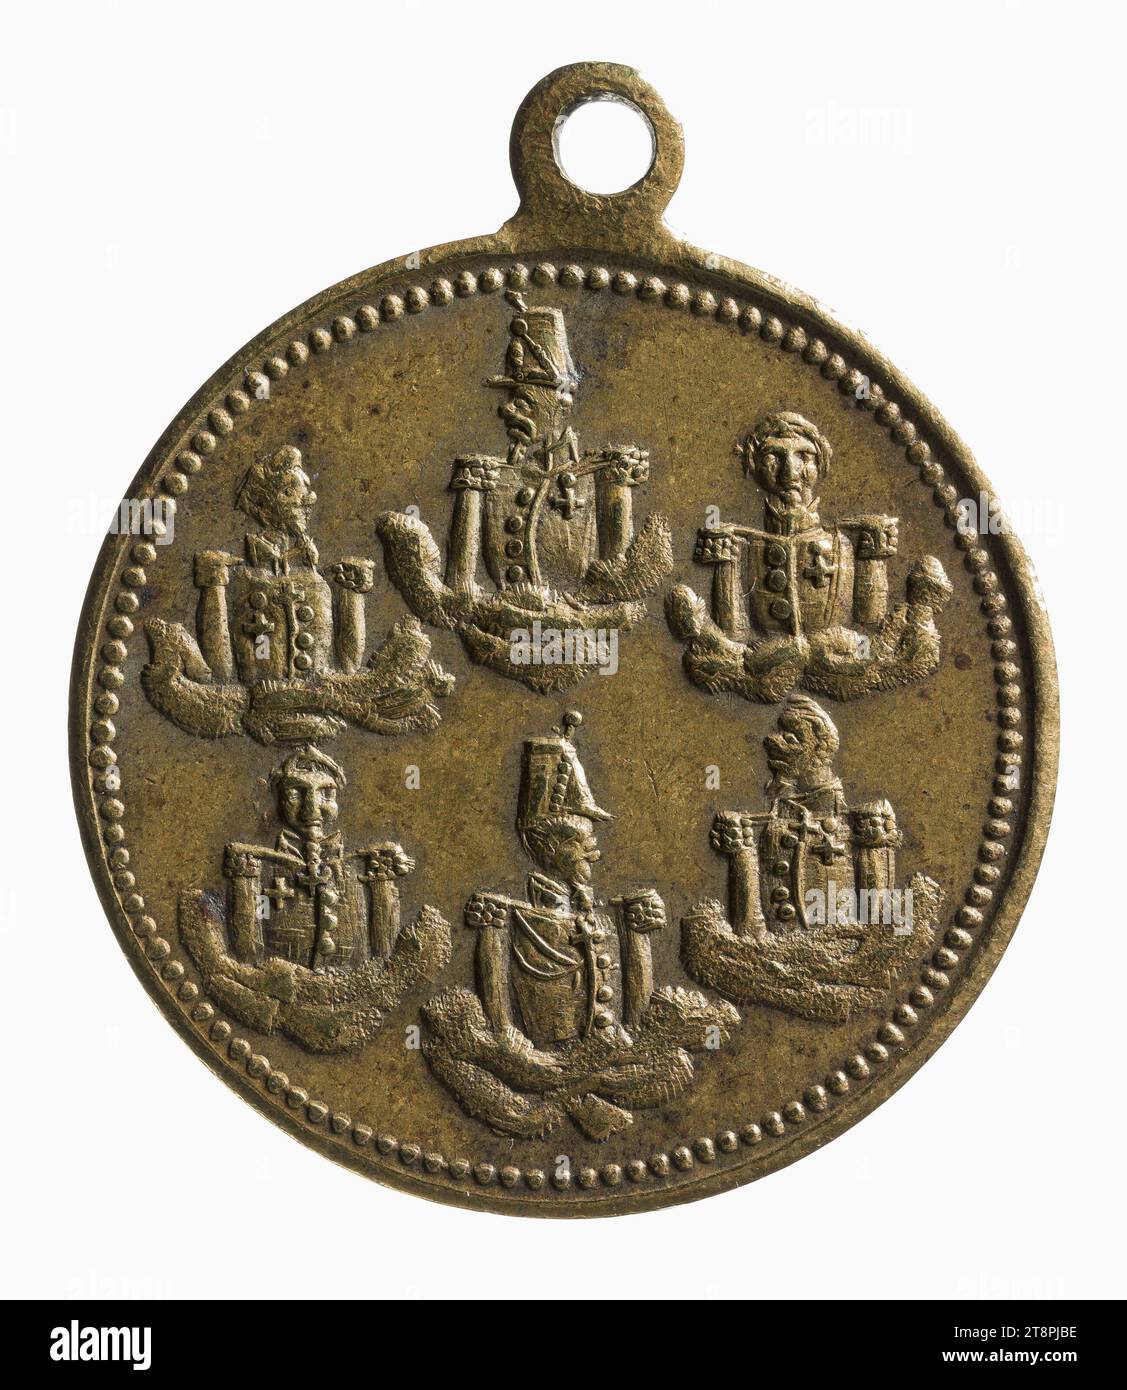 Tribute to the generals killed during the Days of June, 23-24-25-26 June 1848, Array, Numismatic, Medal, Copper, Silver plated = silver plating, Dimensions - Work: Diameter: 2.2 cm, Weight (type dimension): 4.2 g Stock Photo